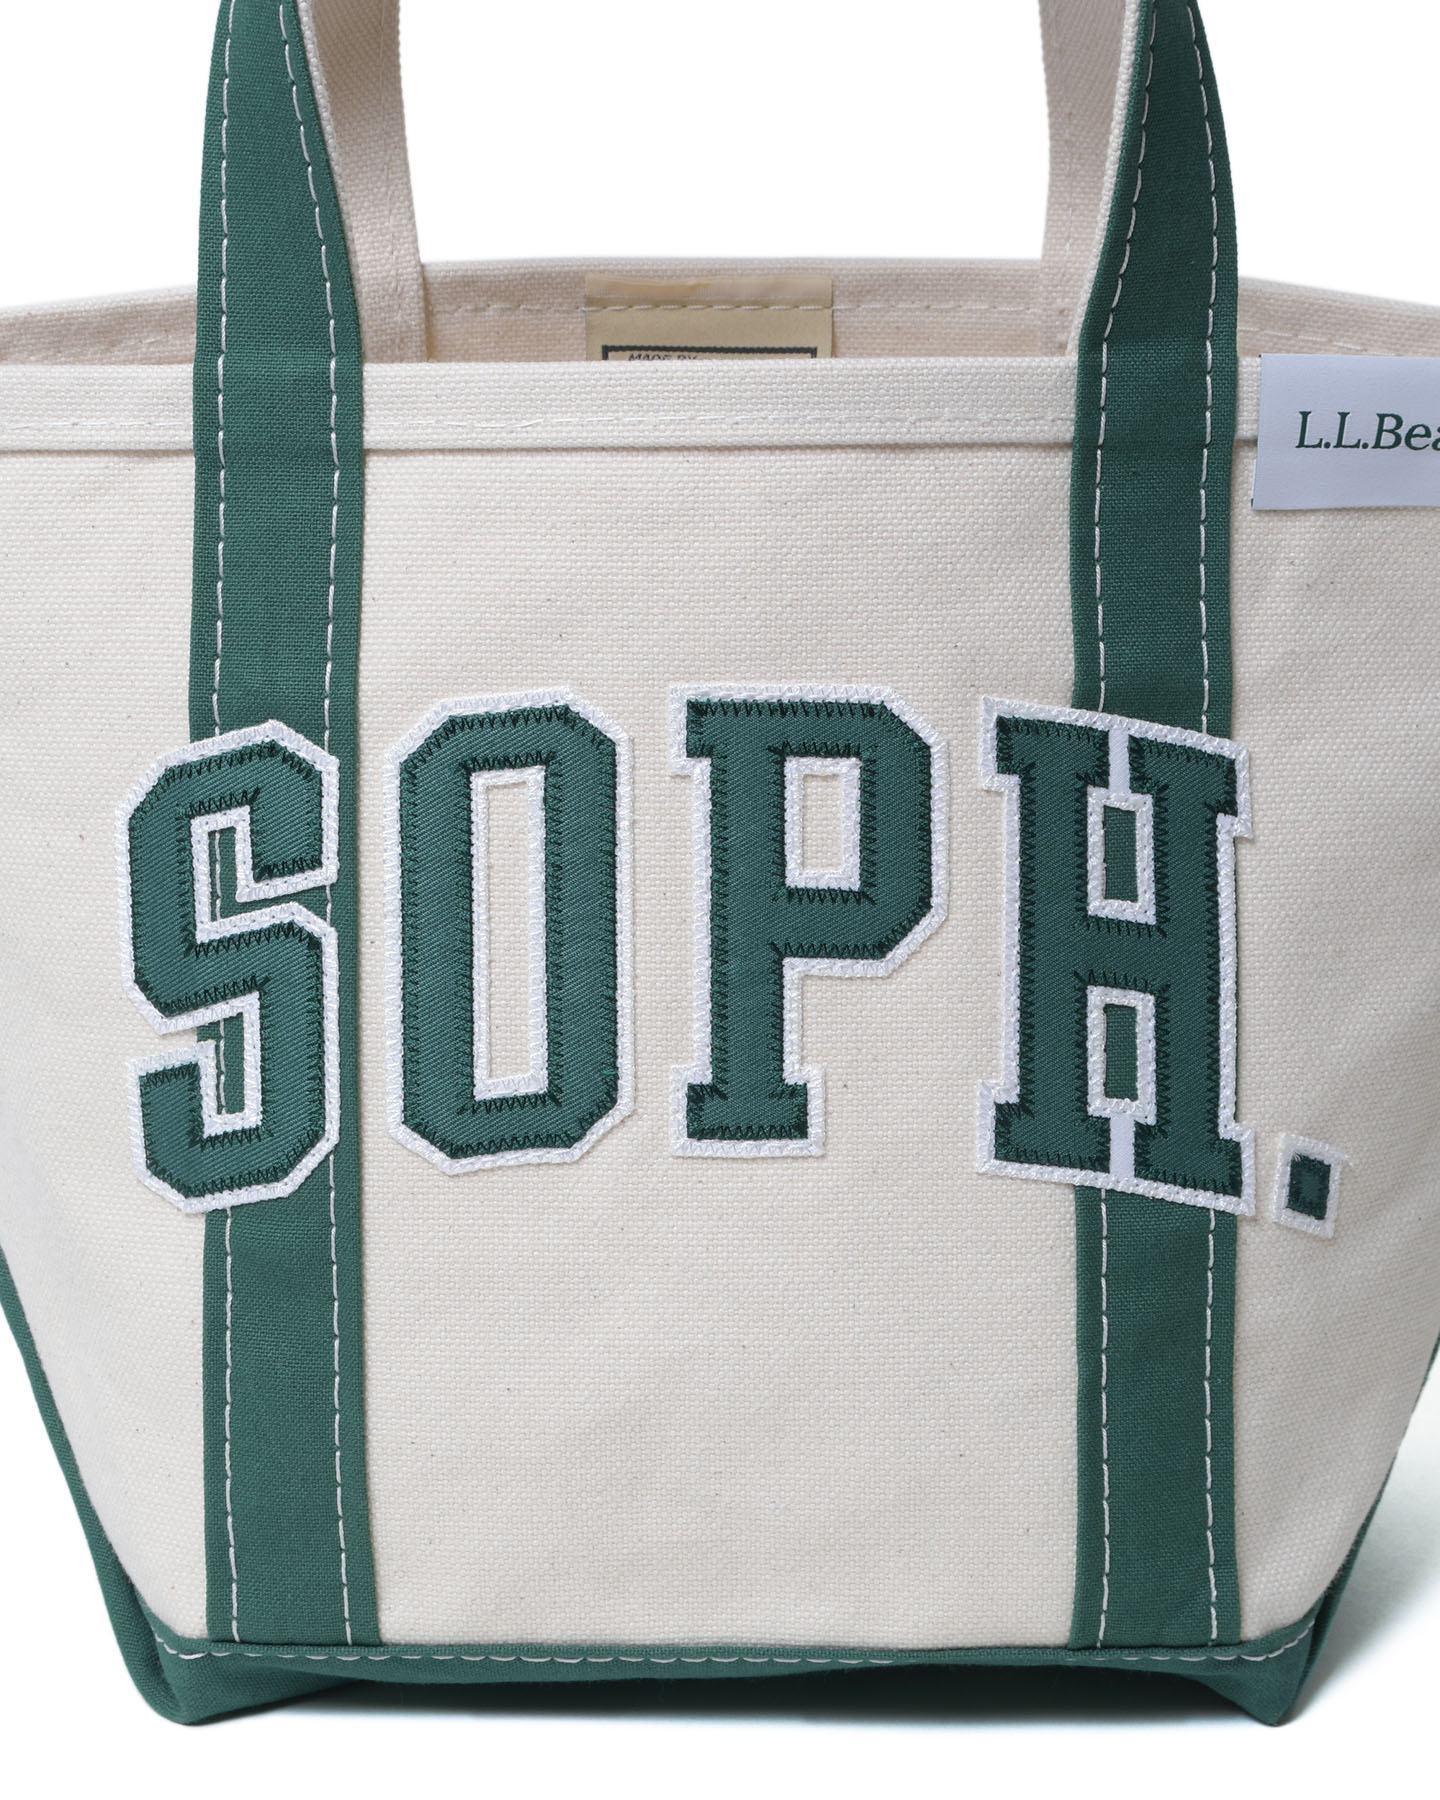 SOPH. | L.L.Bean BOAT AND TOTE, OPEN-TOP : SMALL(FREE GREEN):